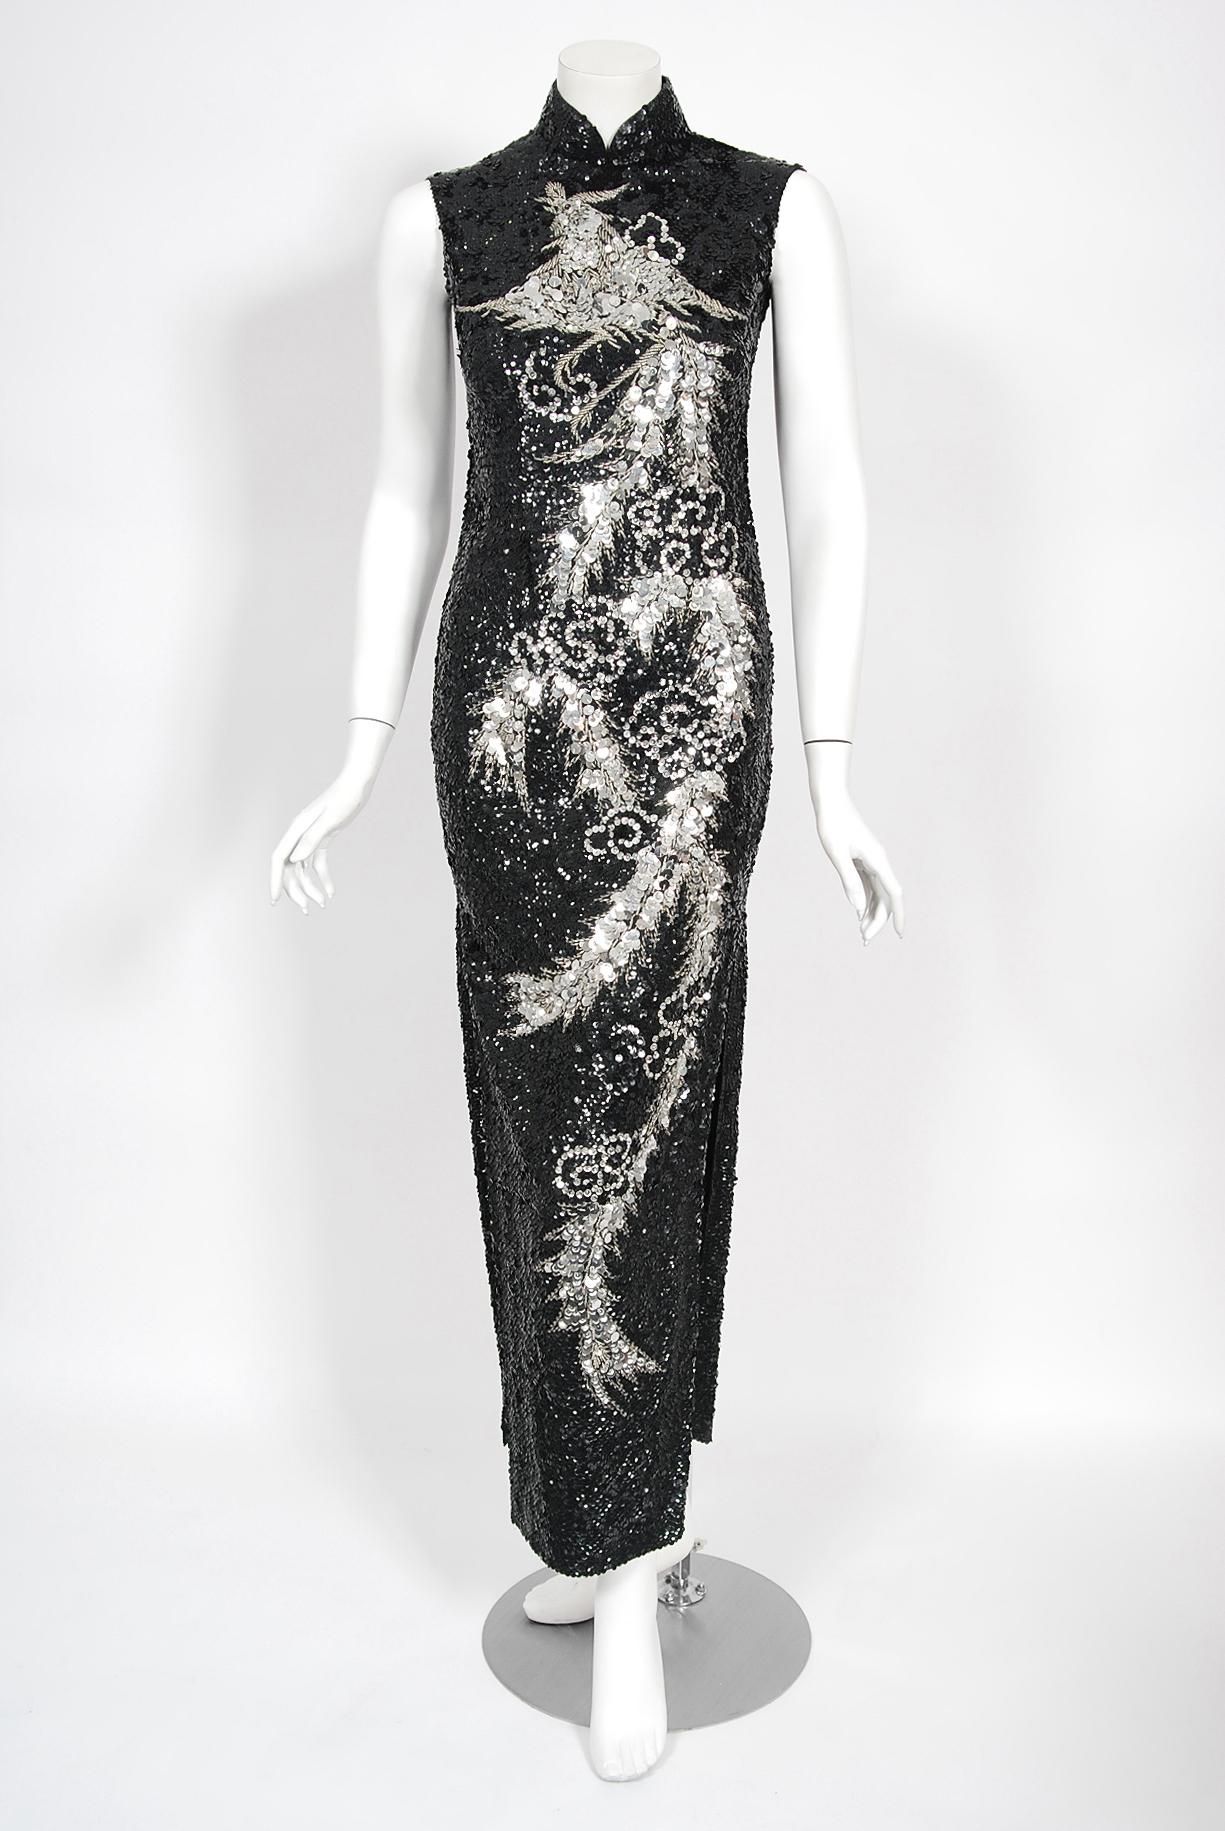 A sensational fully-sequin black & silver hourglass cheongsam gown dating back to the mid 1960's. This showgirl showstopper has fantastic three-dimensional sequins which really dazzles the eye. A dramatic flying phoenix bird motif is worked in with